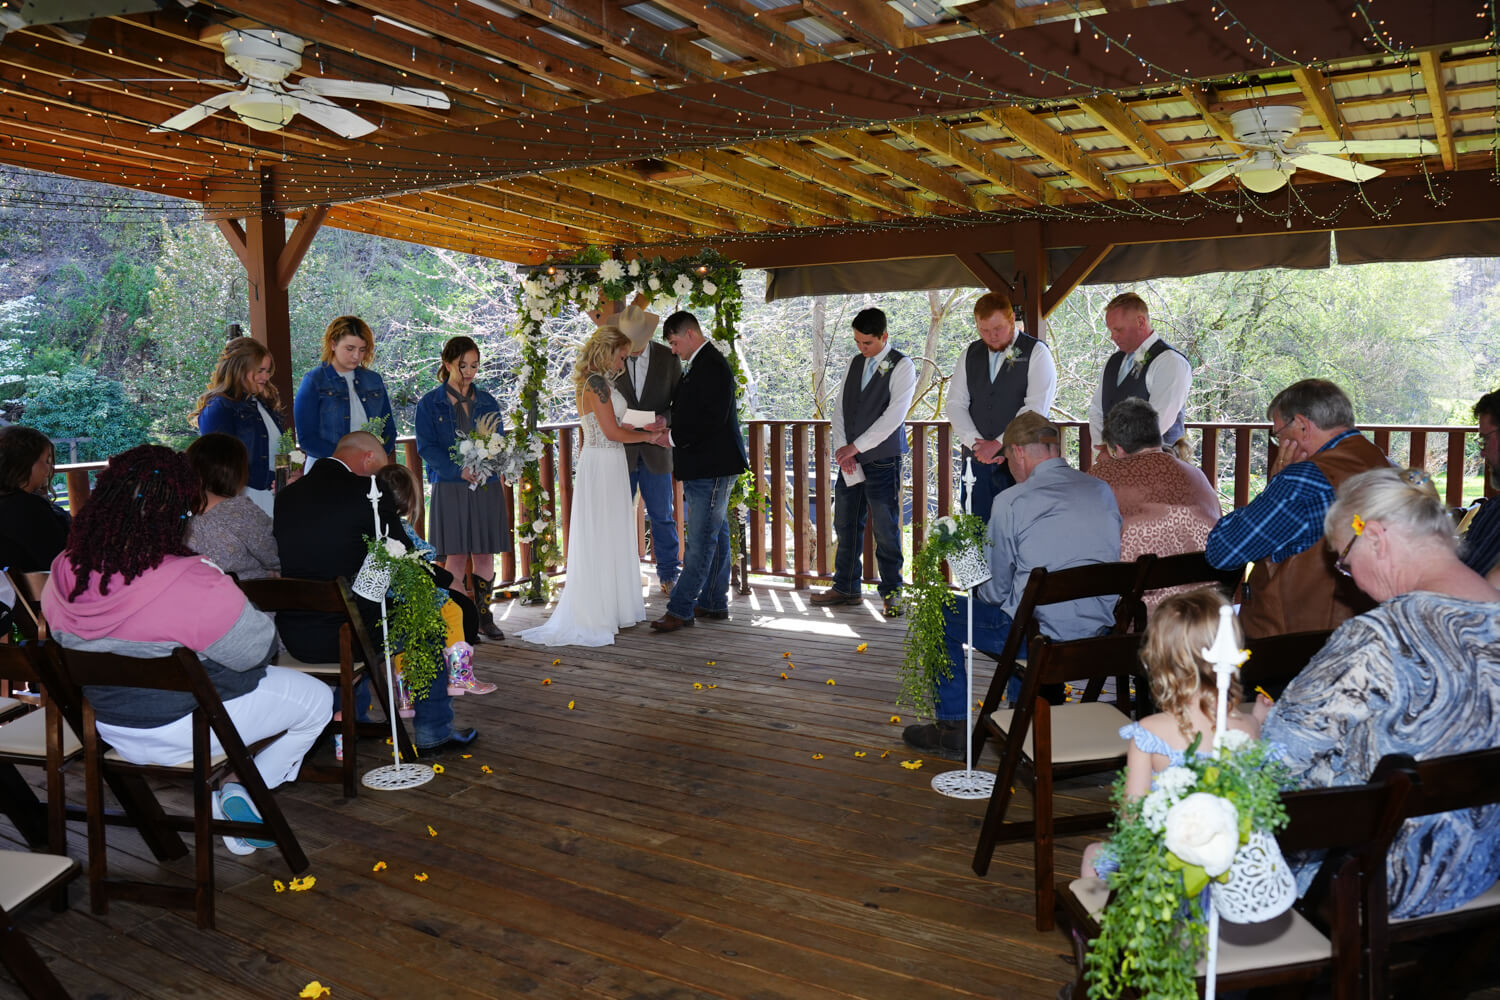 Wedding ceremony under a covered pavilion with twinkling lights on the ceiling